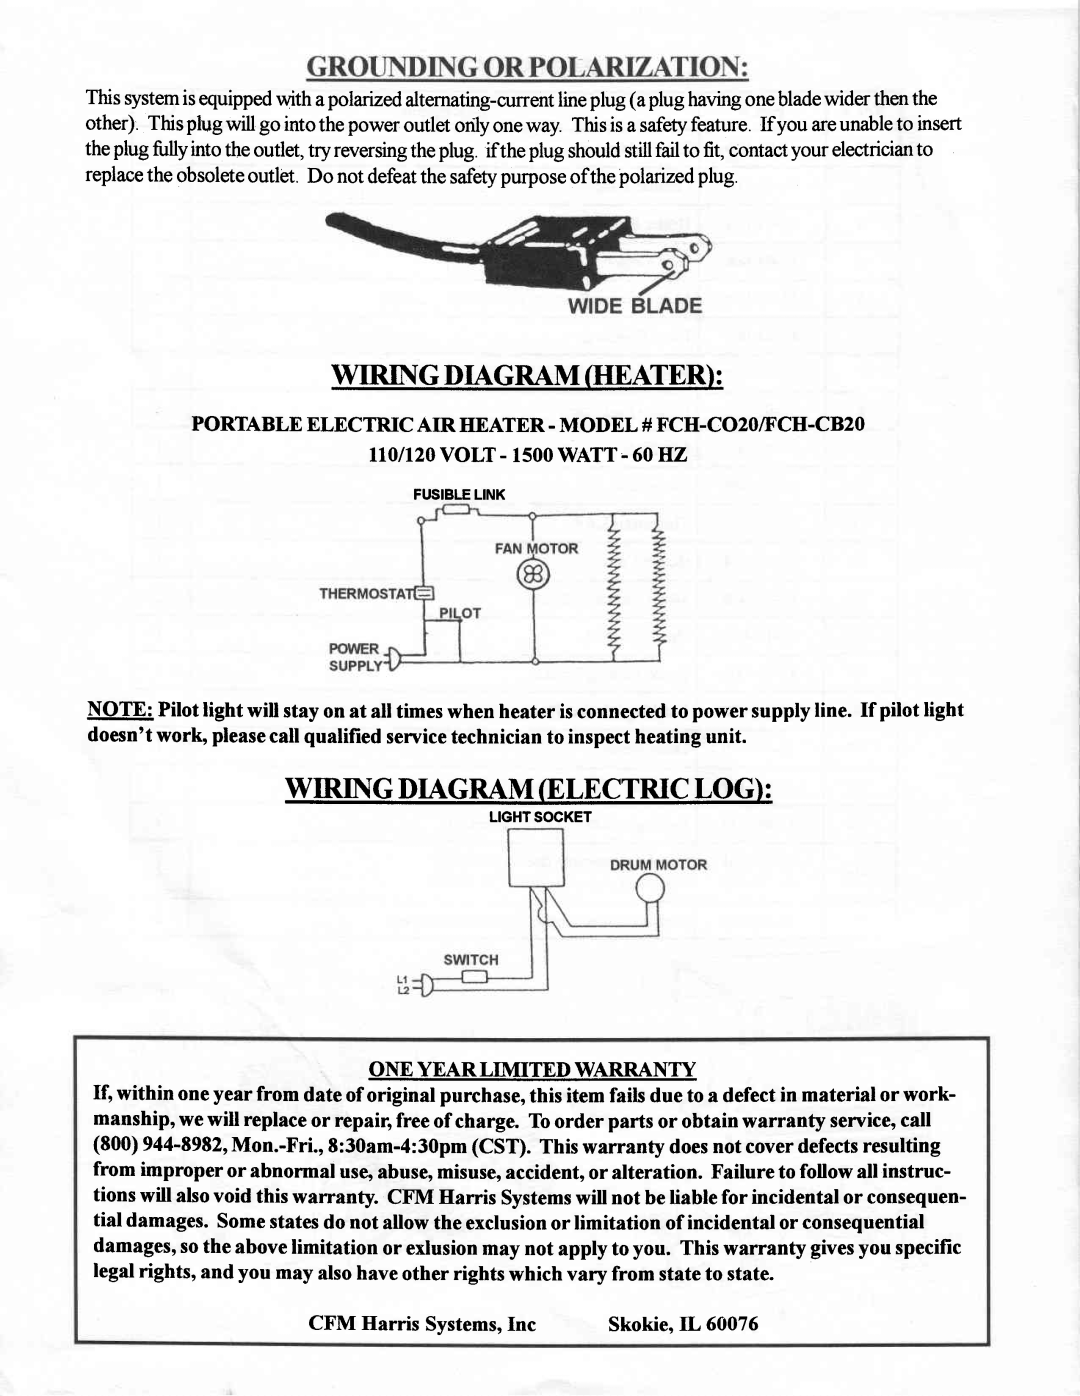 Vermont Casting FCH-CB2O, FCH-CO2O Wiring Diagram Heater, Wirng Diagramelectriclog, rt0/r20 voLT - 1500WATT- 60H2 